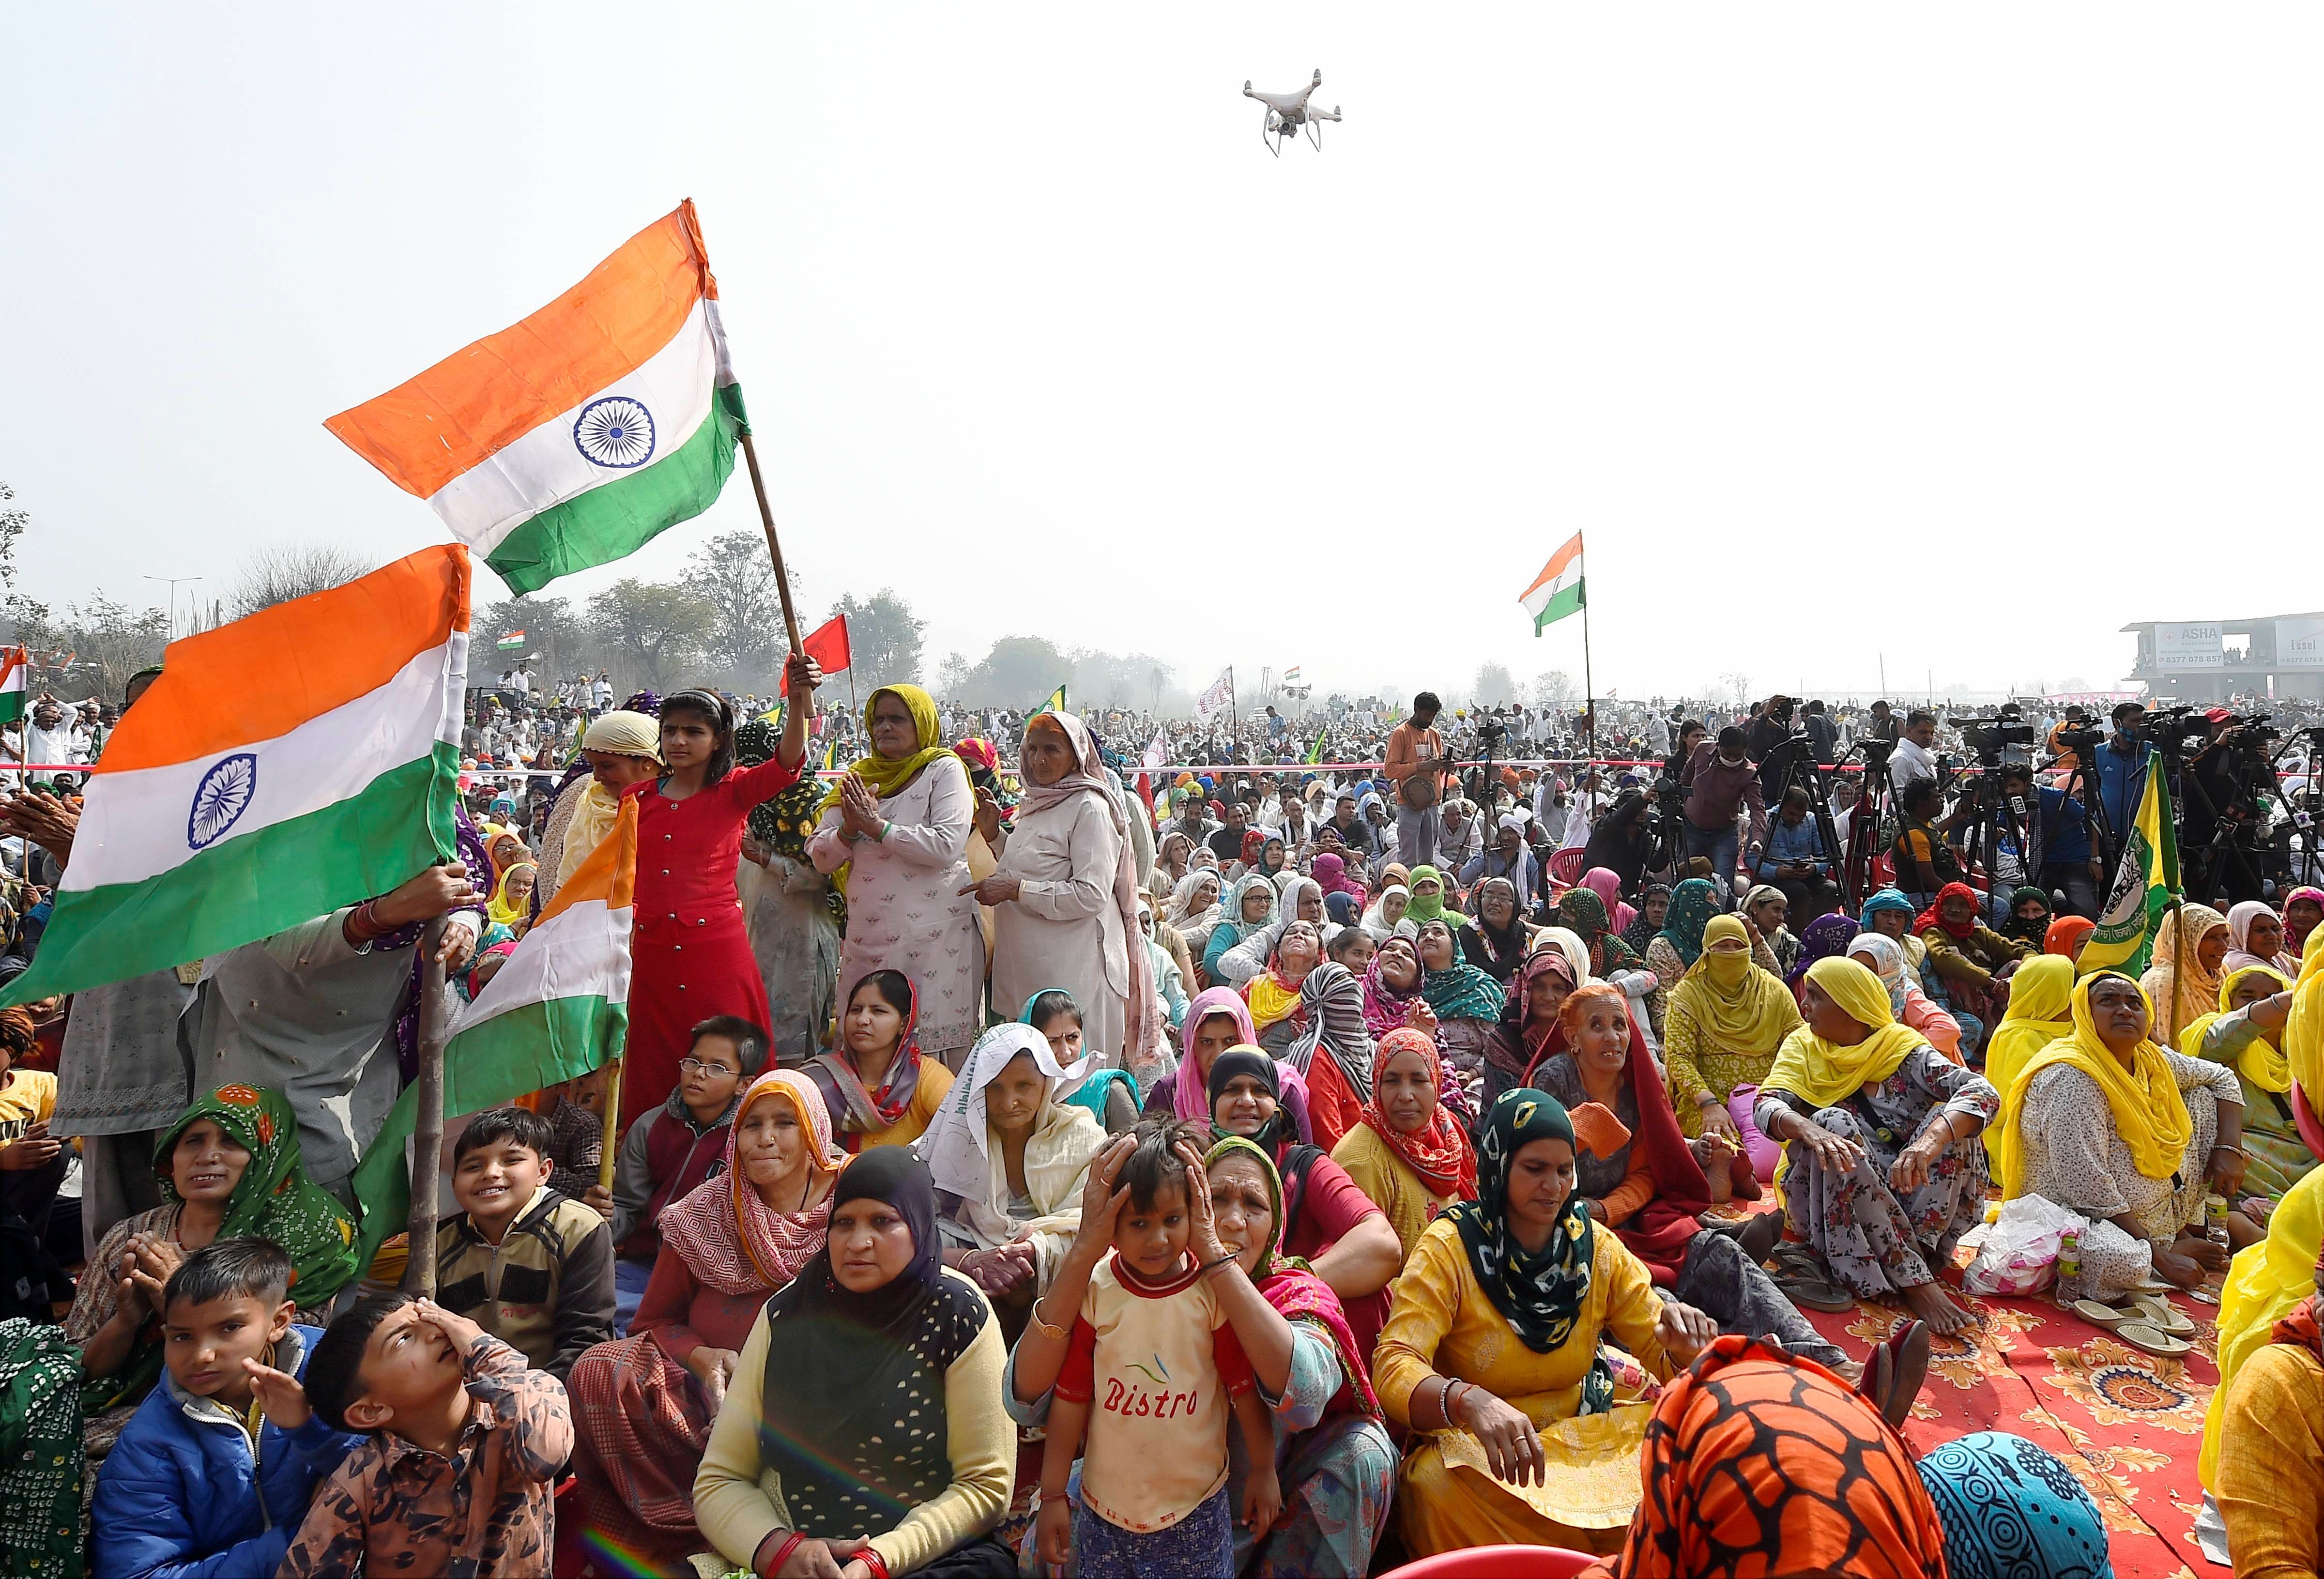 A drone used for surveillance by the police, during a 'Kisan Mahapanchayat' in support of the ongoing farmers' agitation against Centre's farm reform laws, at Bahadurgarh in Jhajjar district, Friday, Feb. 12, 2021. Credit: PTI Photo